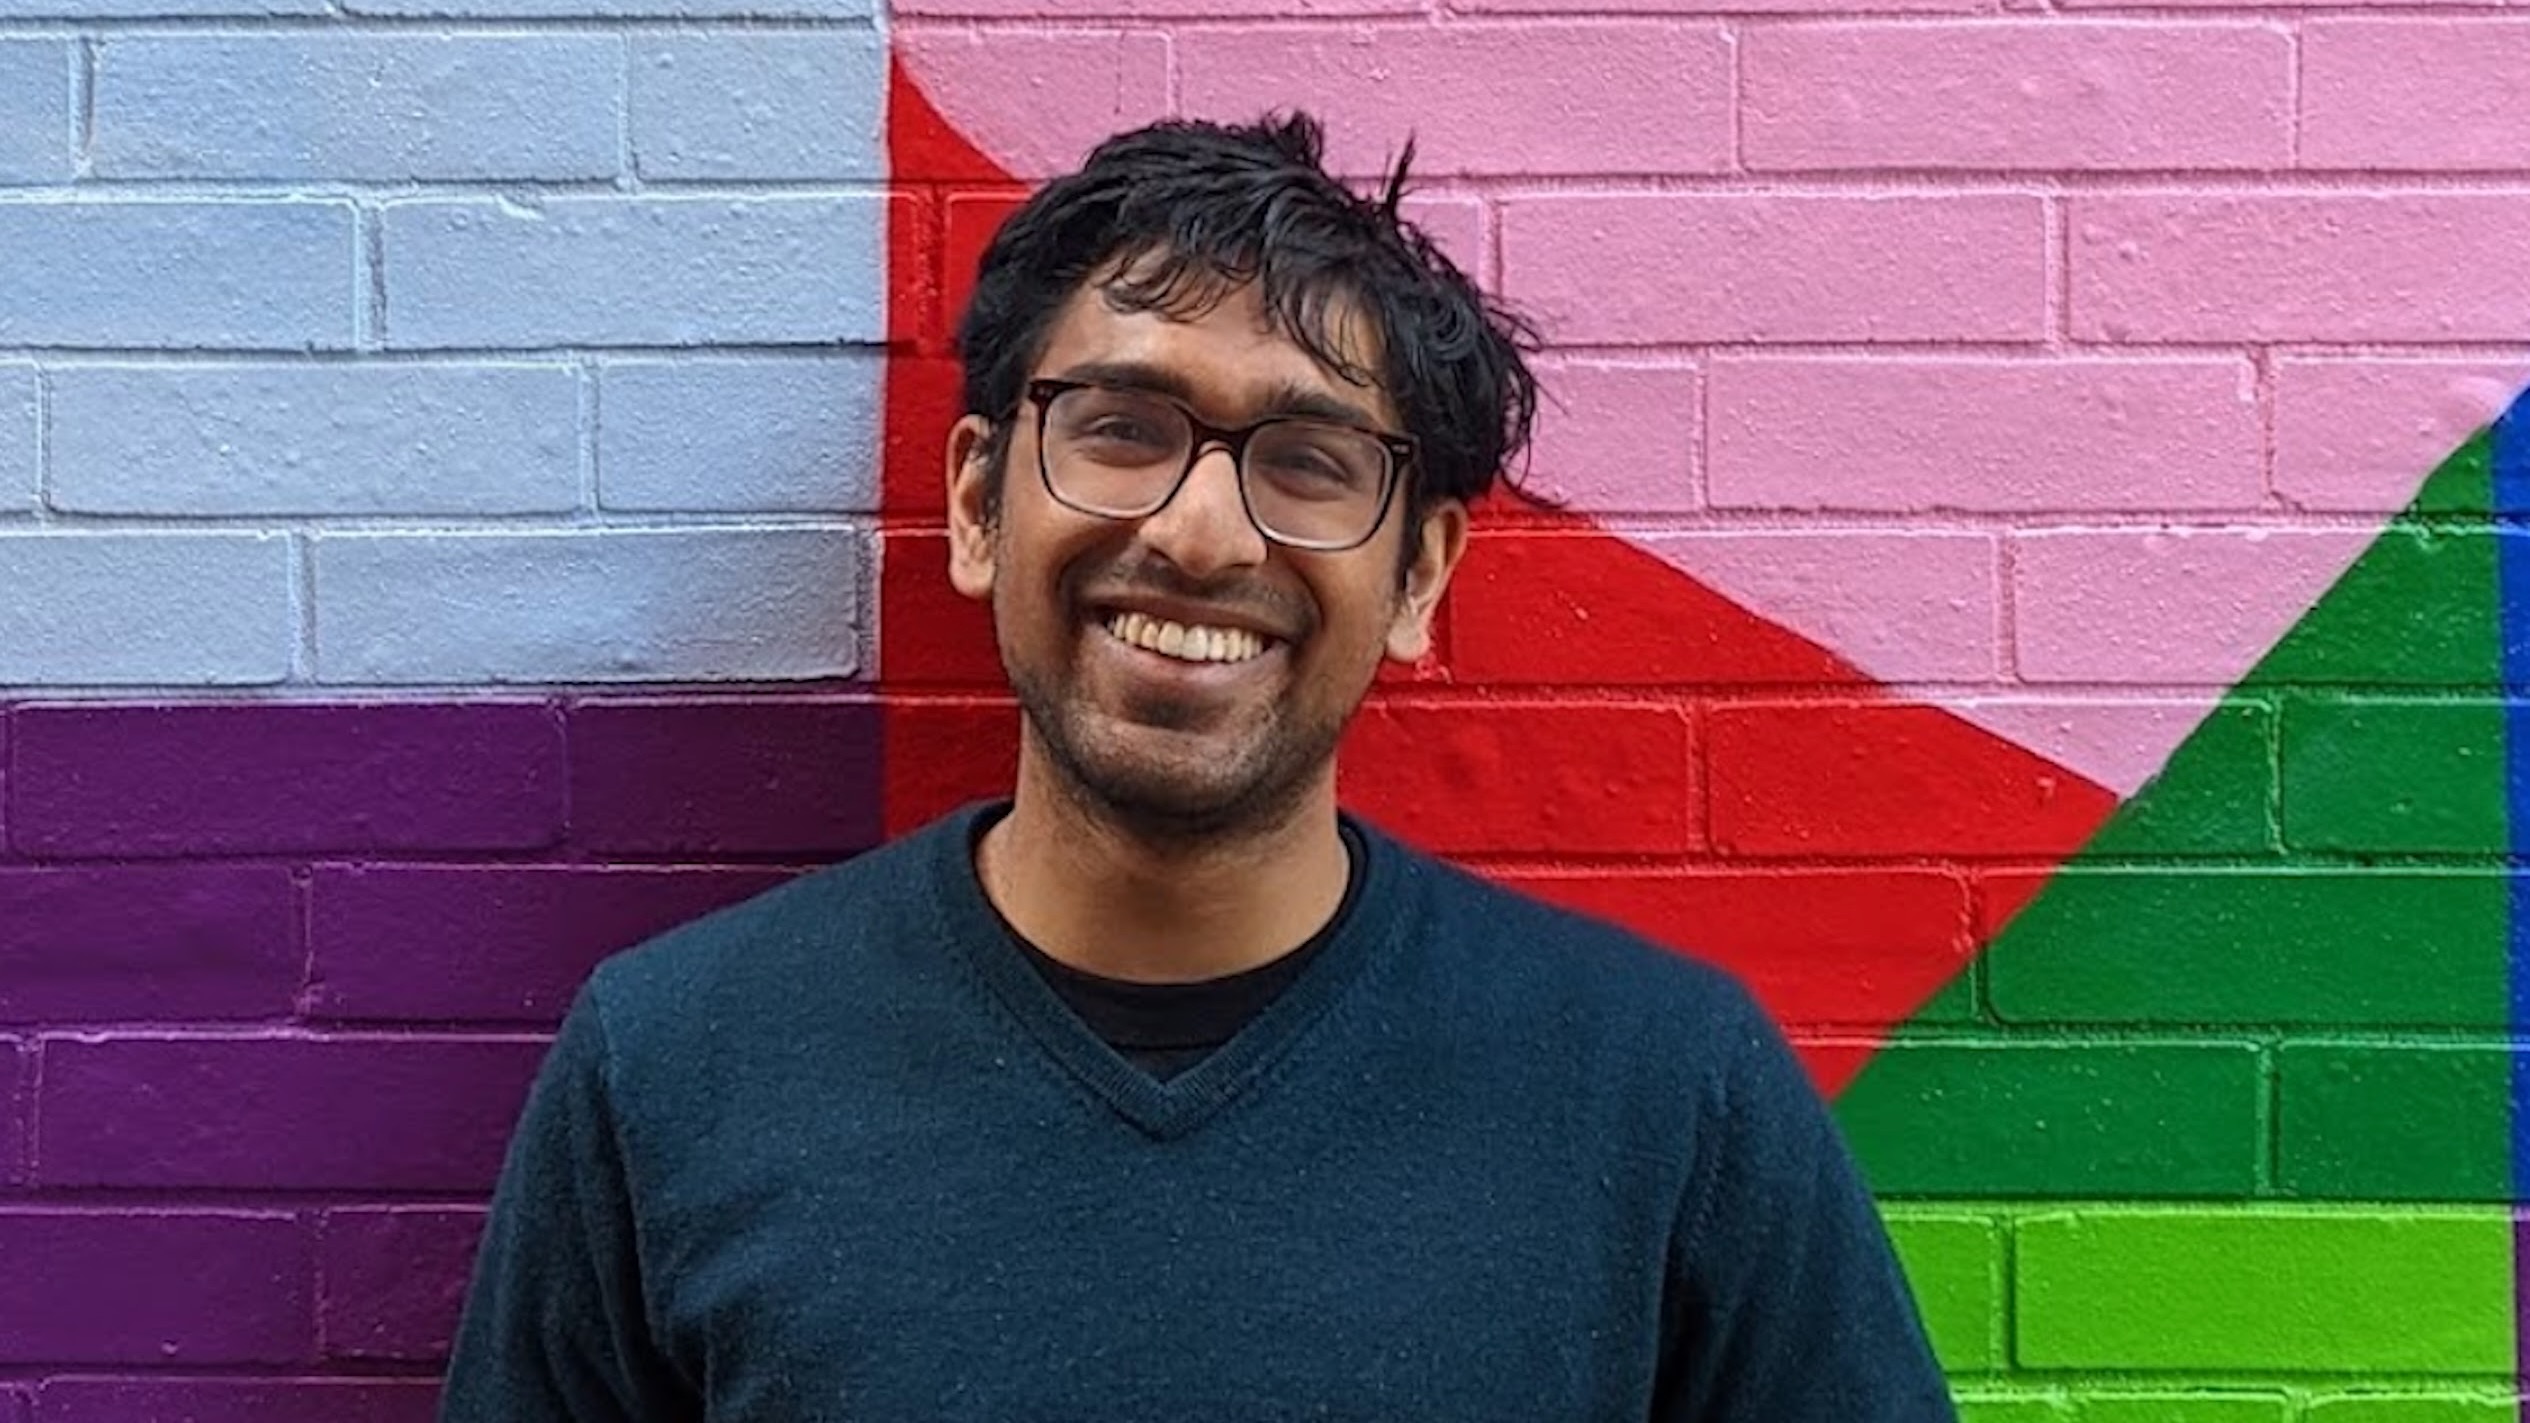 Sathvik Nair, PhD student in Linguistics, standing in front of a brick wall painted colorfully with geometric shapes, smiling broadly.